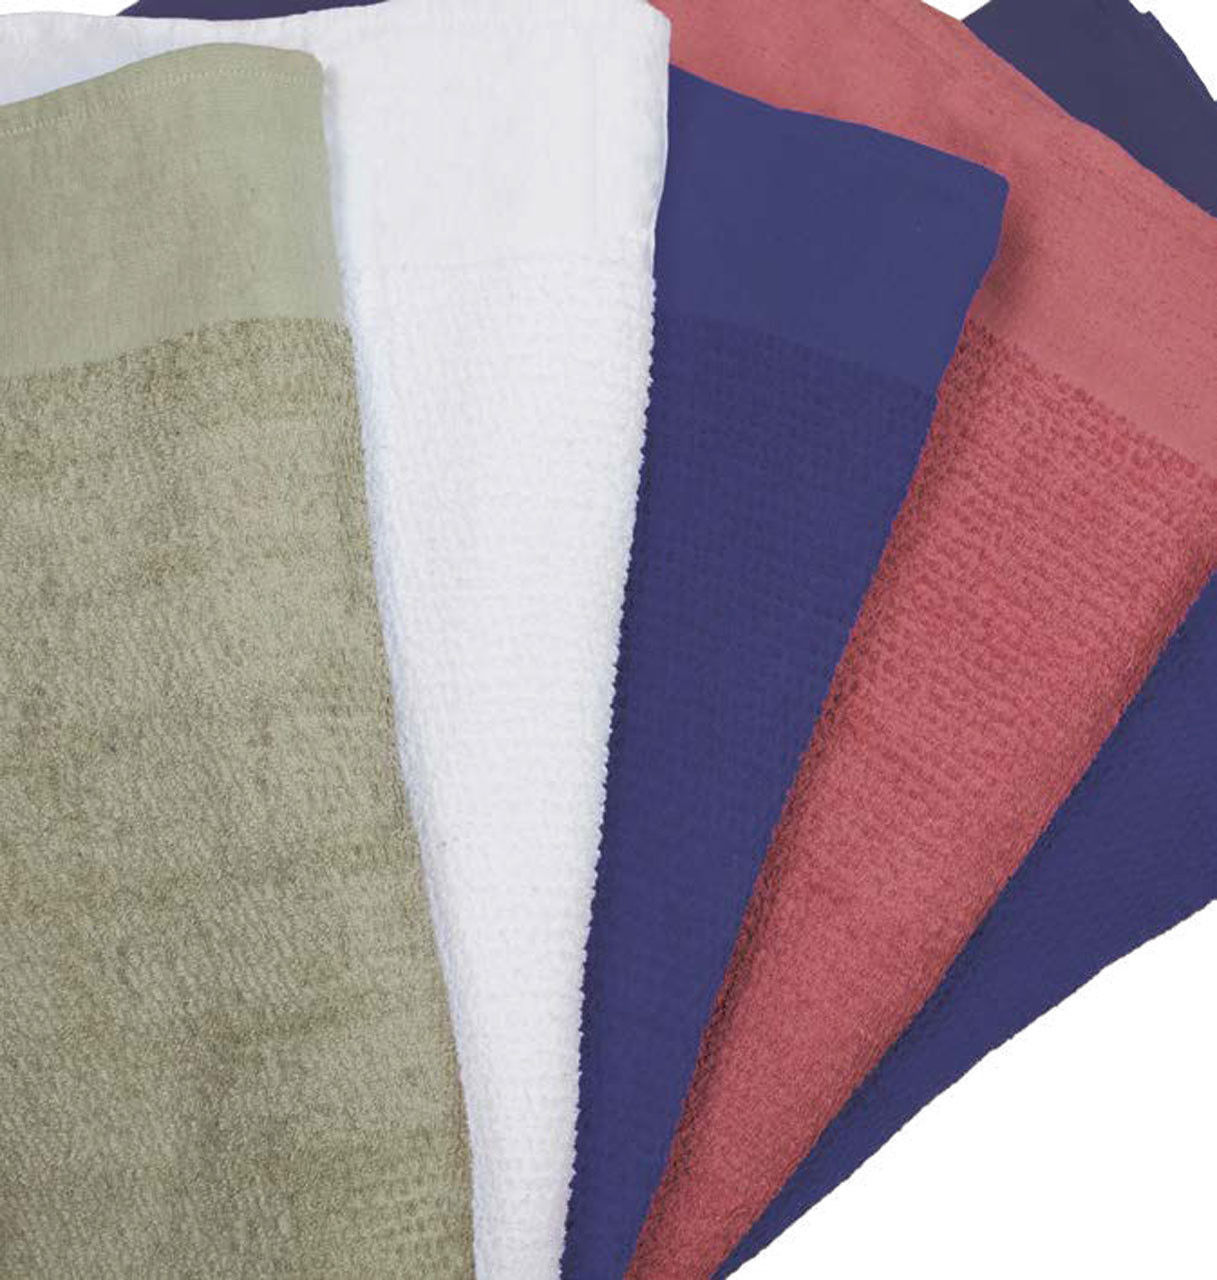 What are the latest colors for Terry Hospital Blankets, the terry cloth blanket?